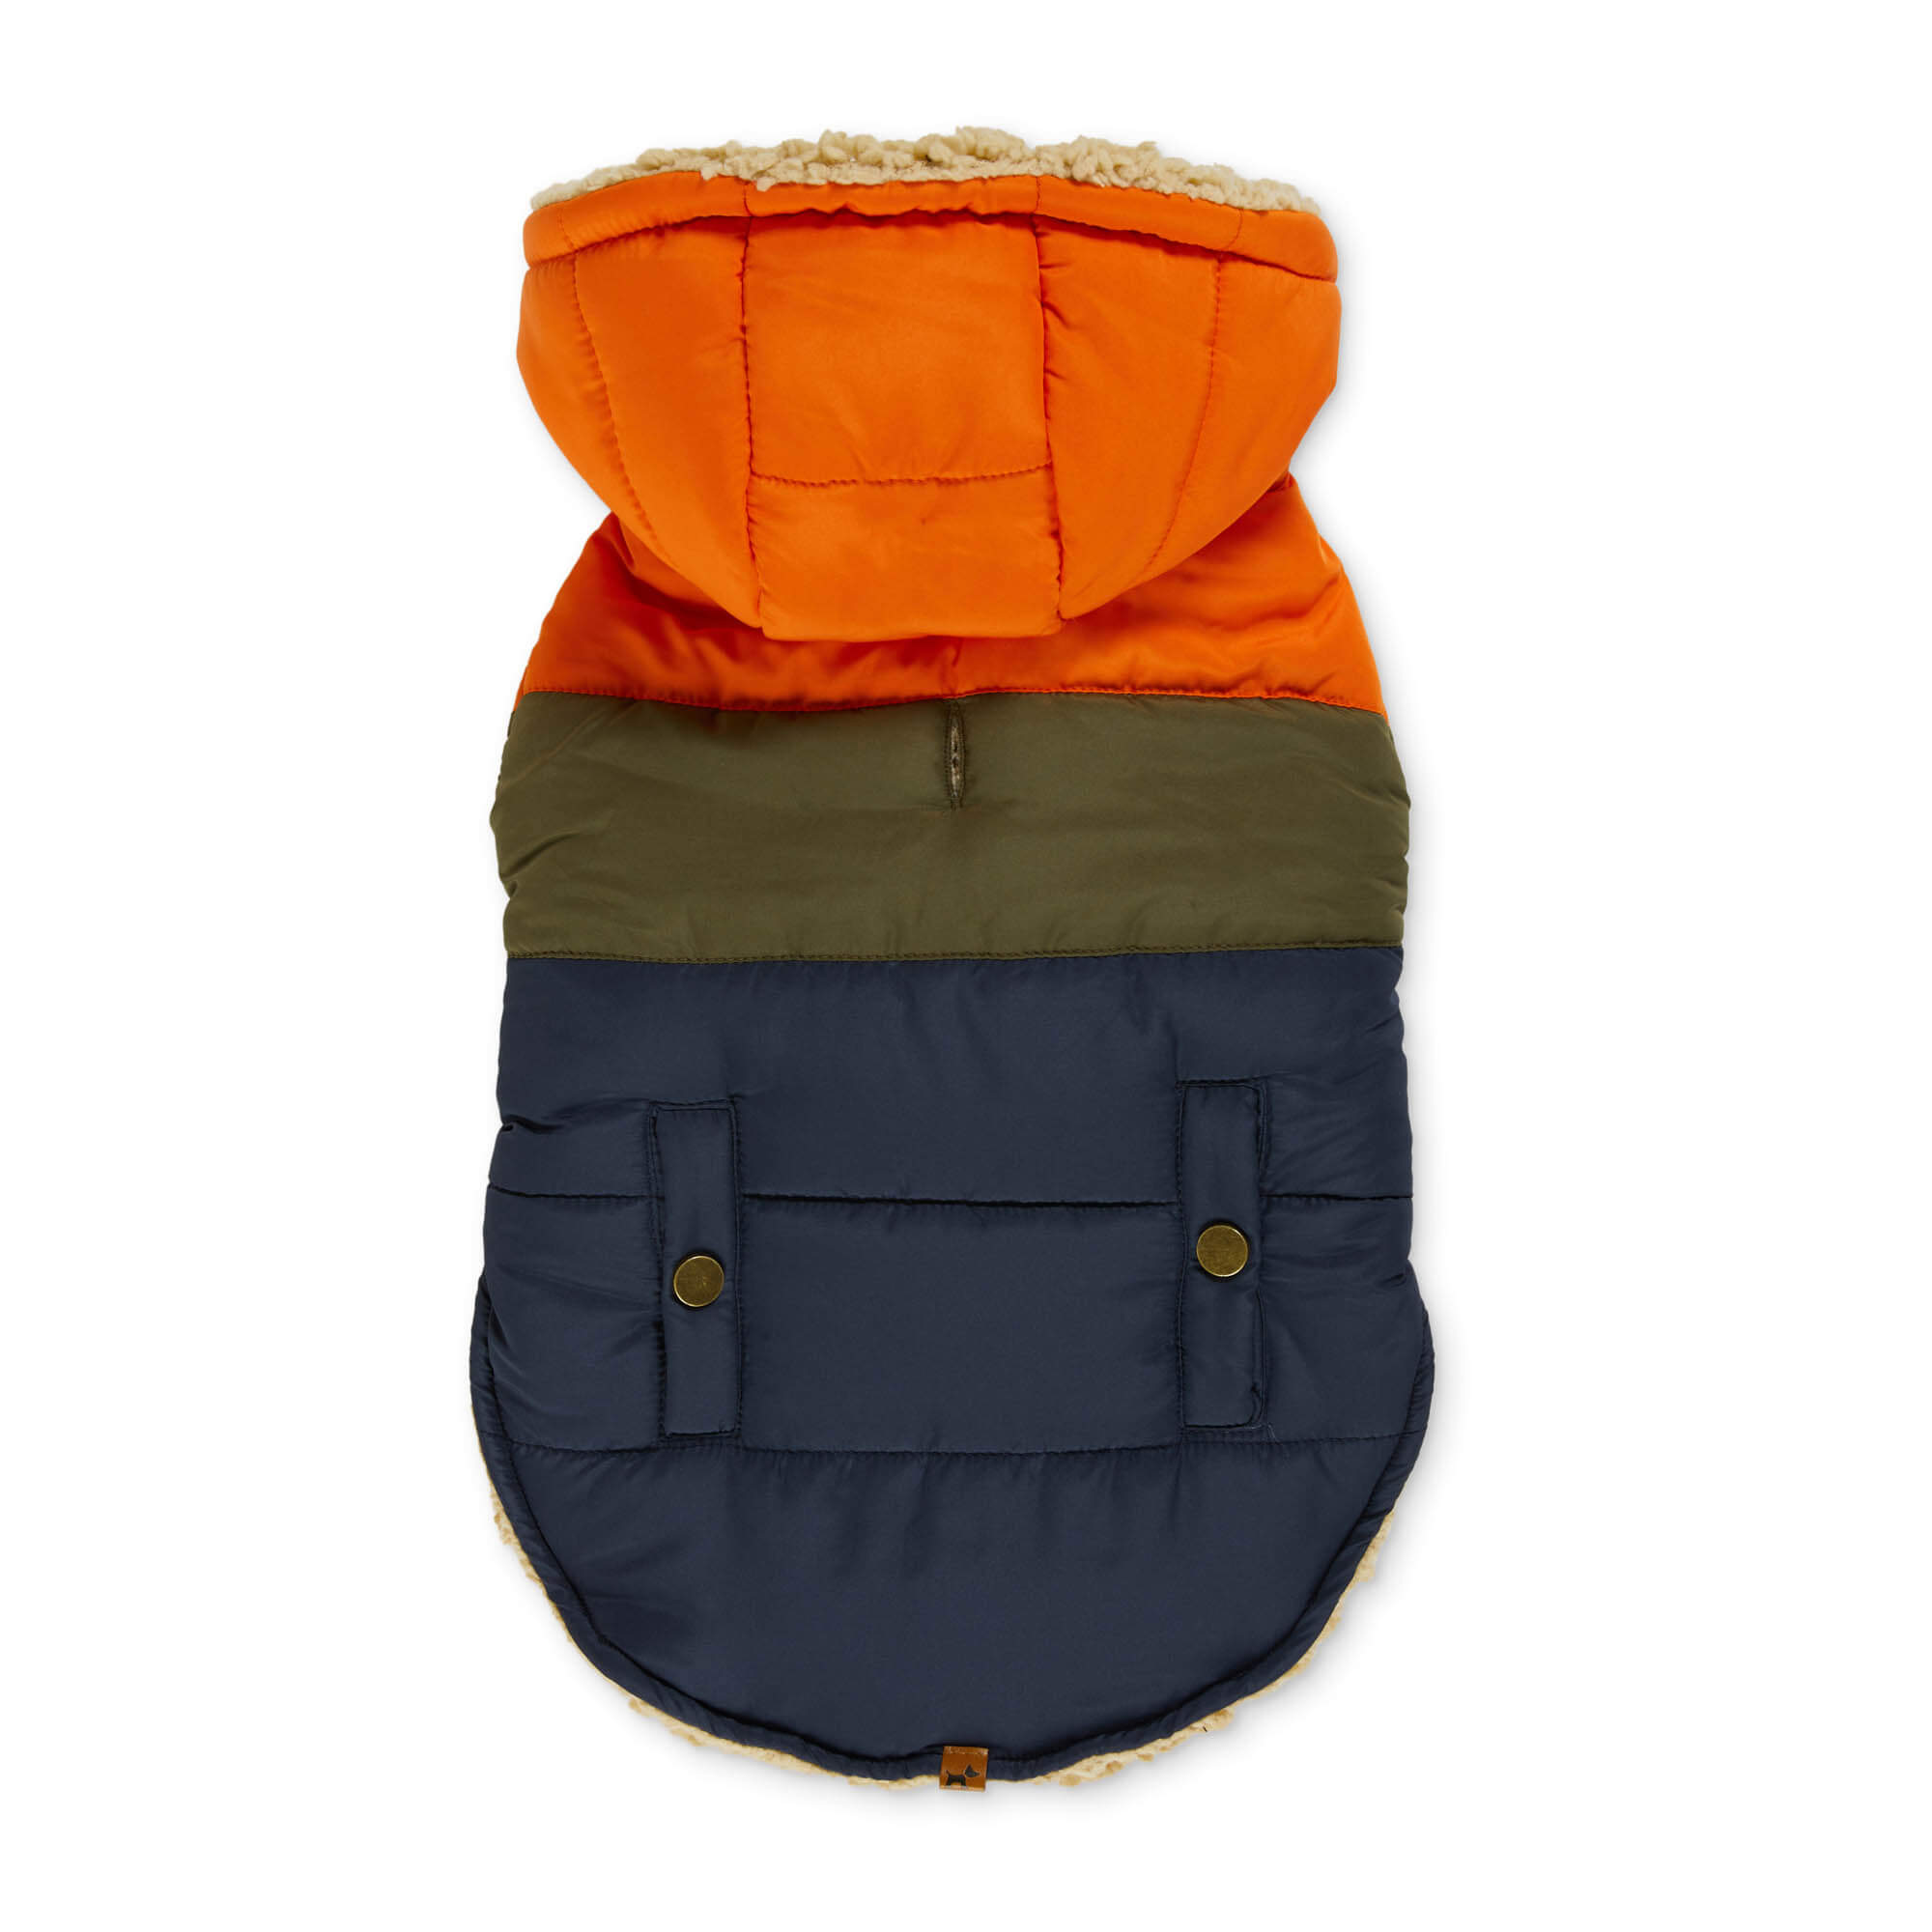 Orange and blue parka. Top view